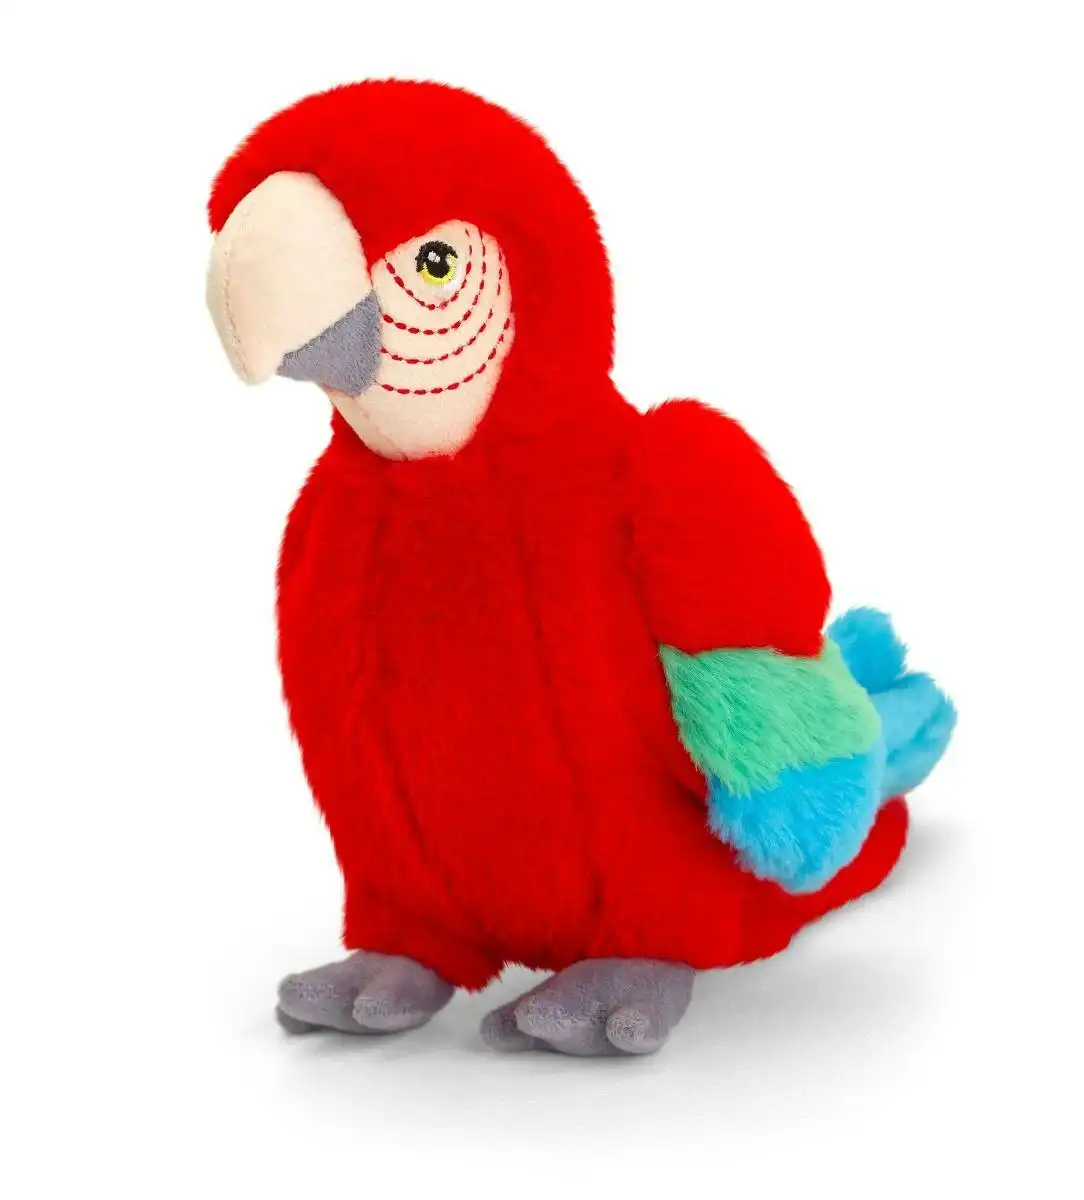 Keeleco 20cm Parrot Kids/Children/Toddler Animal Soft Plush Stuffed Toy Red 3y+